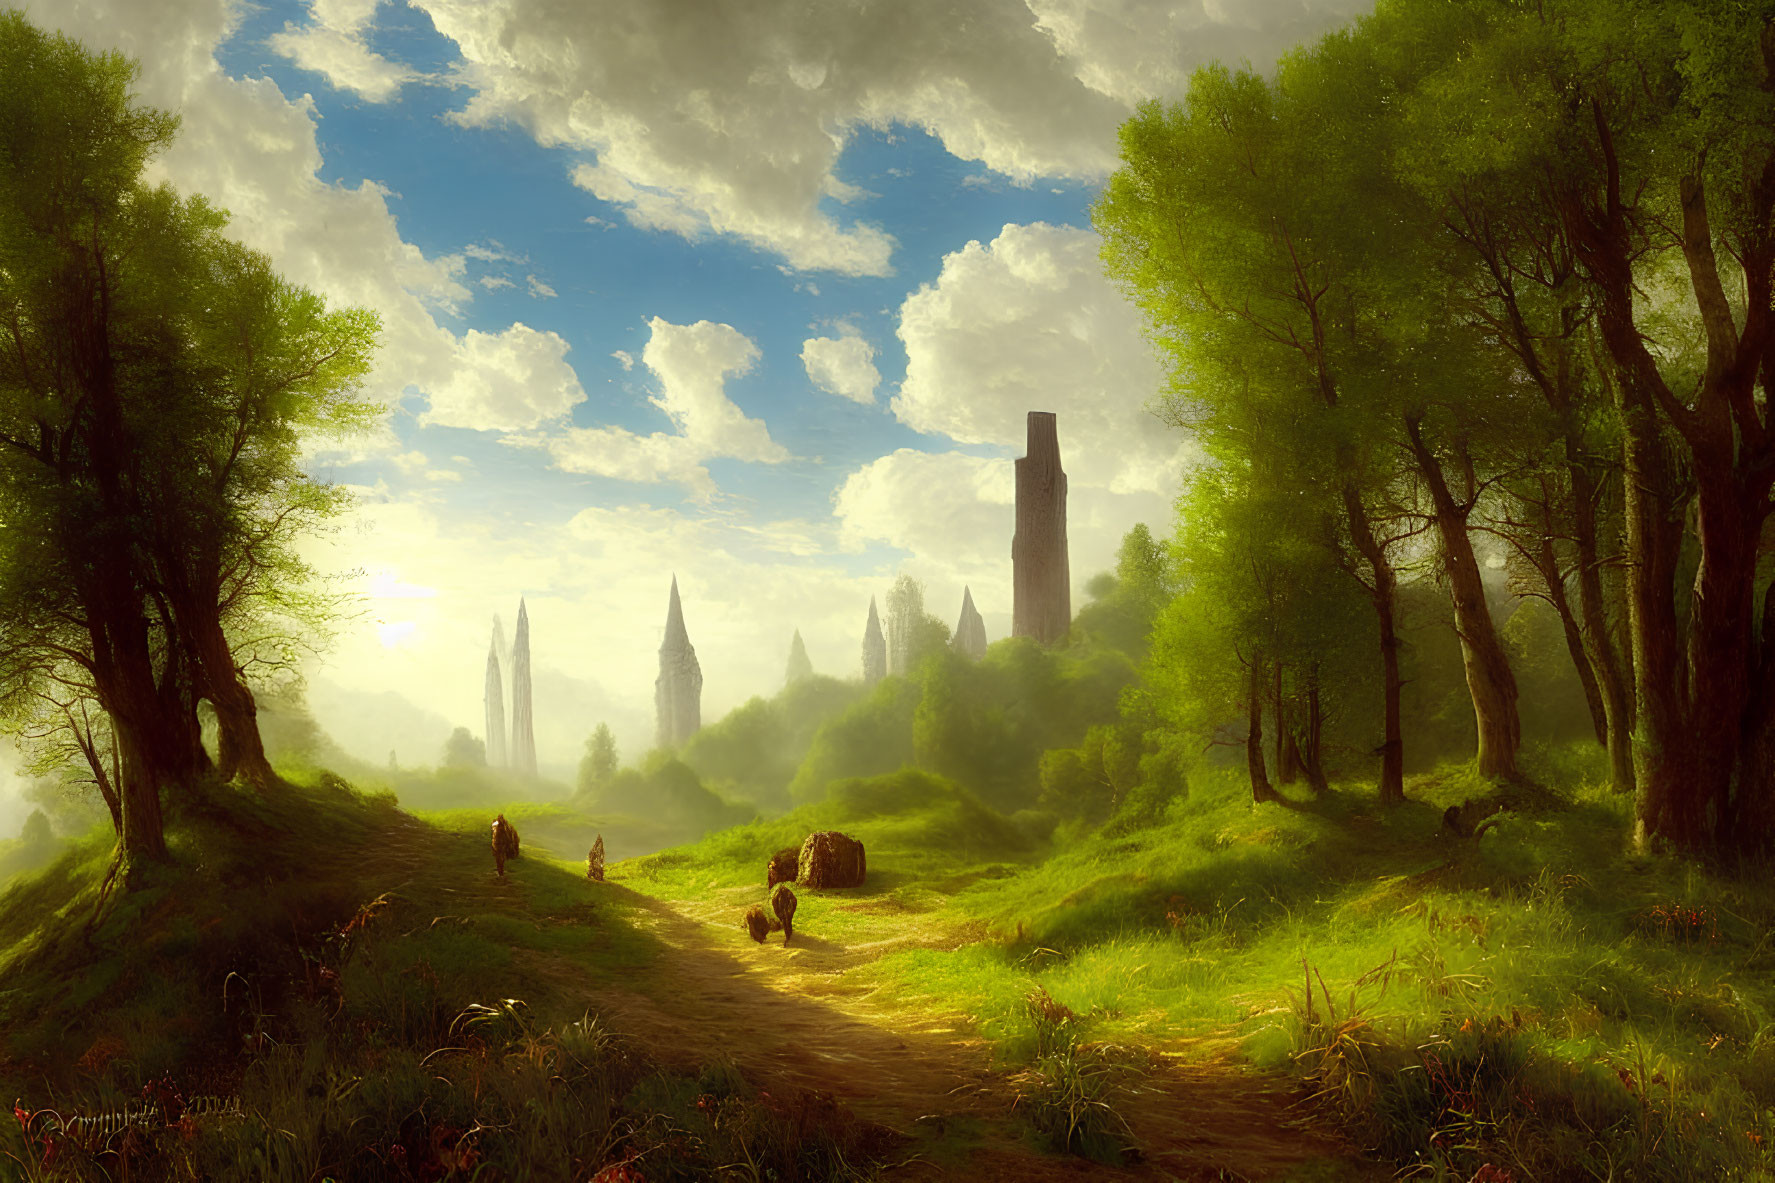 Sunlit Path Through Fantasy Landscape with Castles and Trees